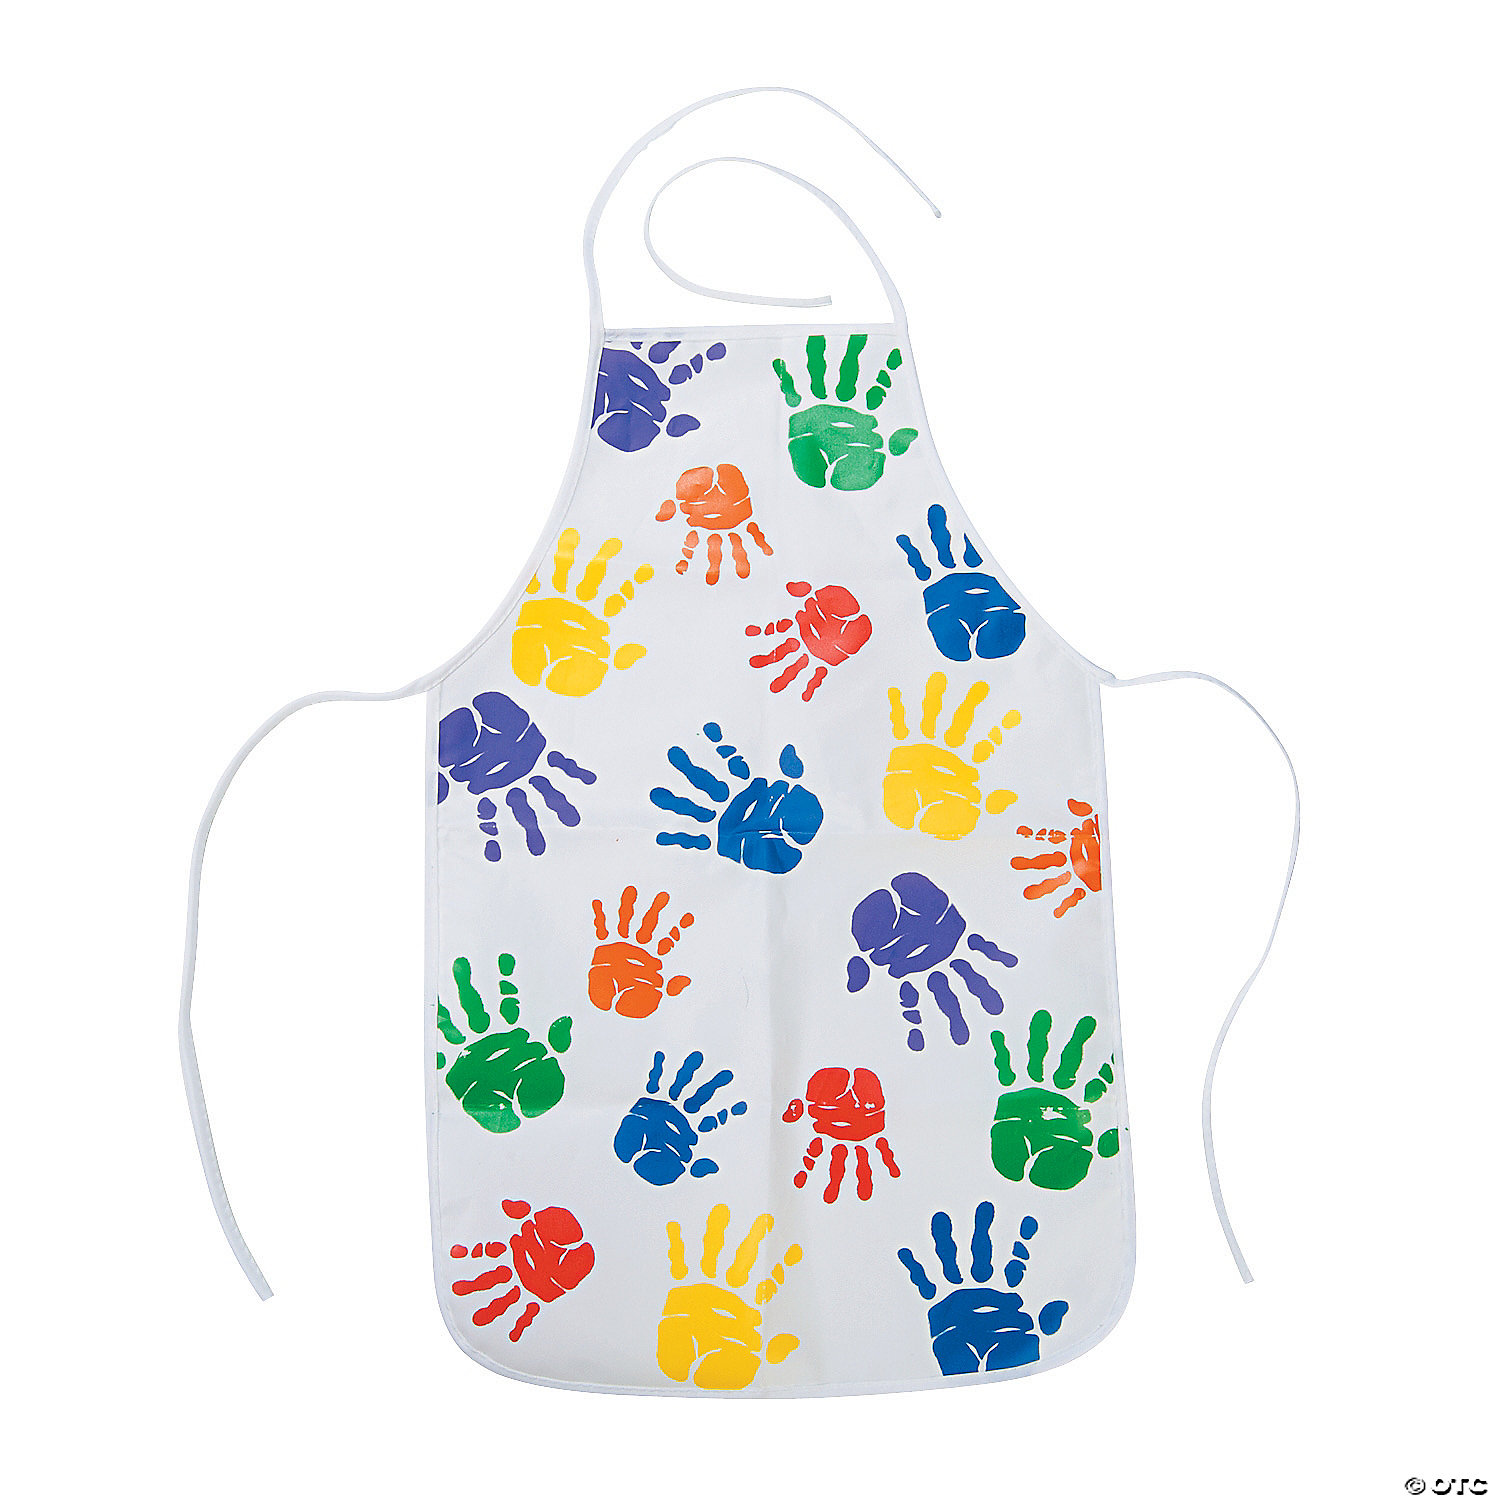 Kid's Aprons Gift Idea Children's Aprons Kid's Arts & Crafts Aprons Play Time